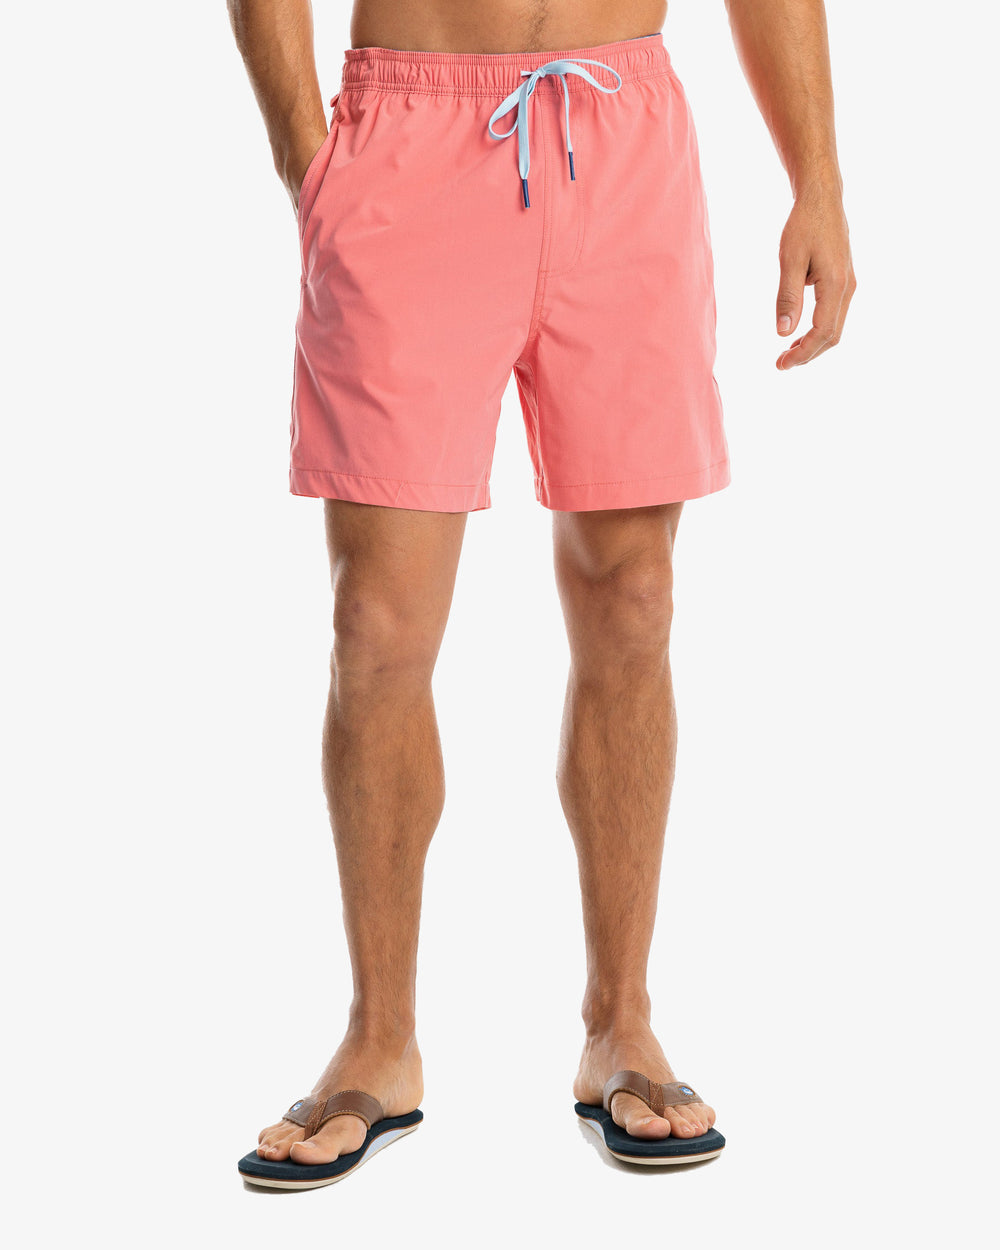 The model front view of the Men's Solid Swim Trunk by Southern Tide - Rouge Red